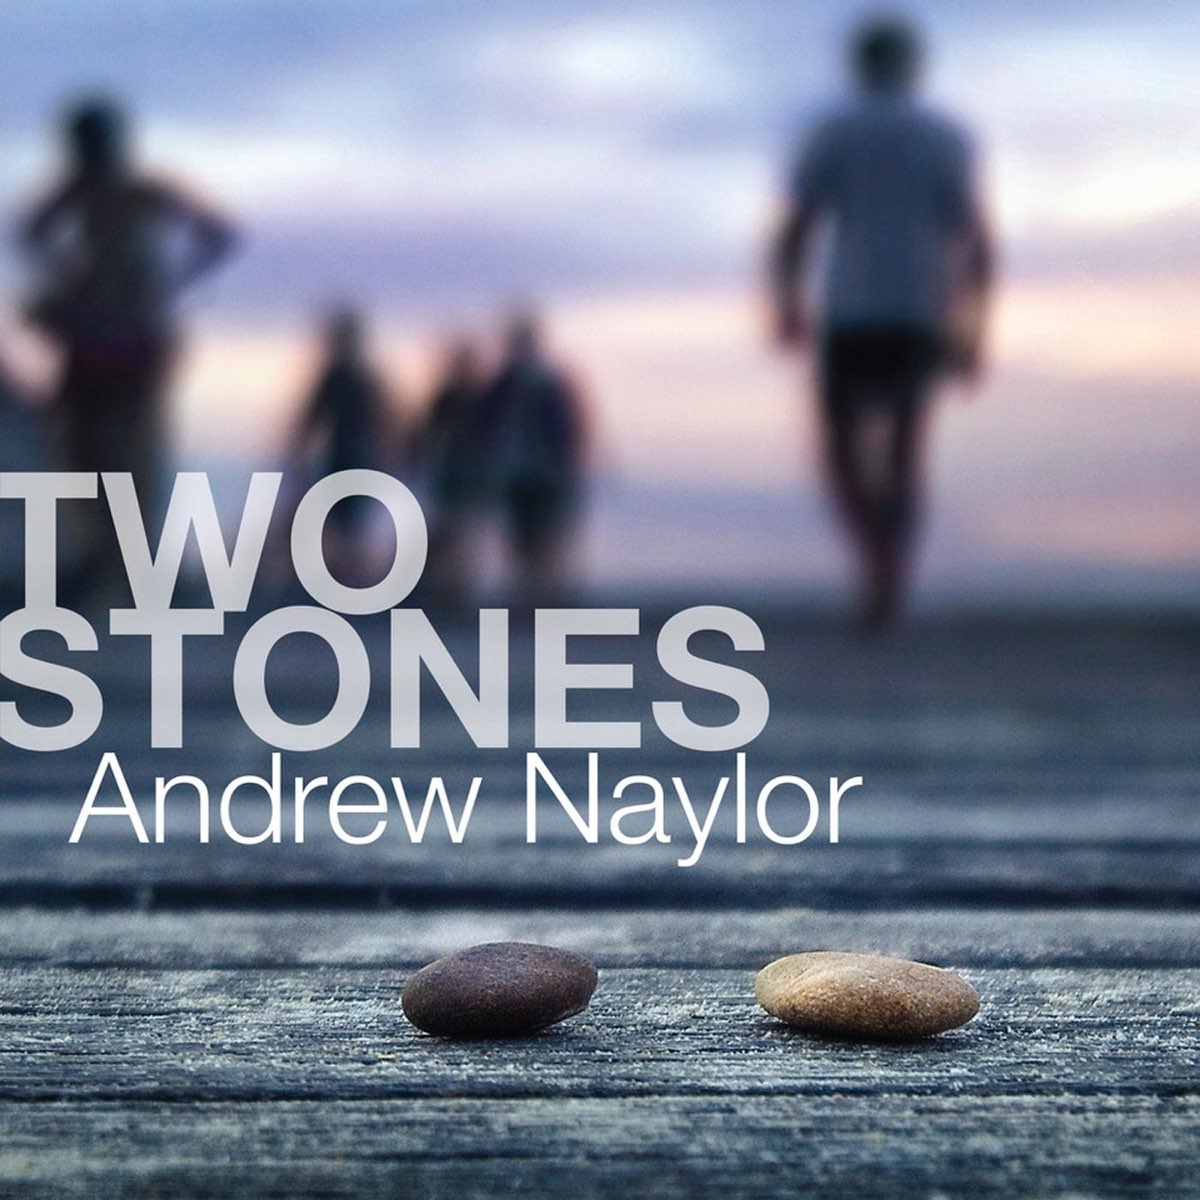 Нейлор 2. Helen Naylor "two Lives". Andy Stone. Two Stones Fall and Hit a person.